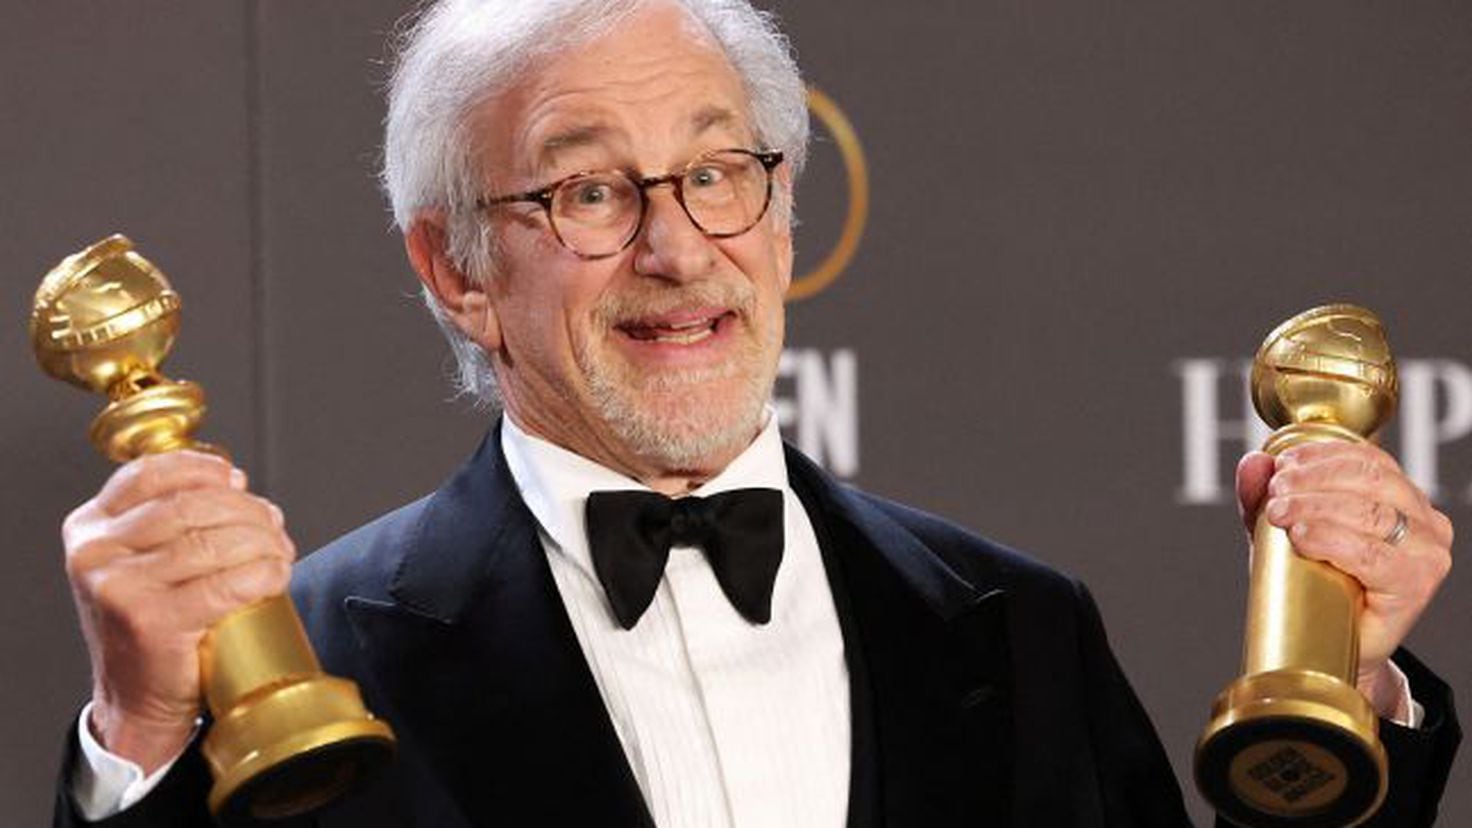 How many Oscars has Steven Spielberg won and for which movies? AS USA